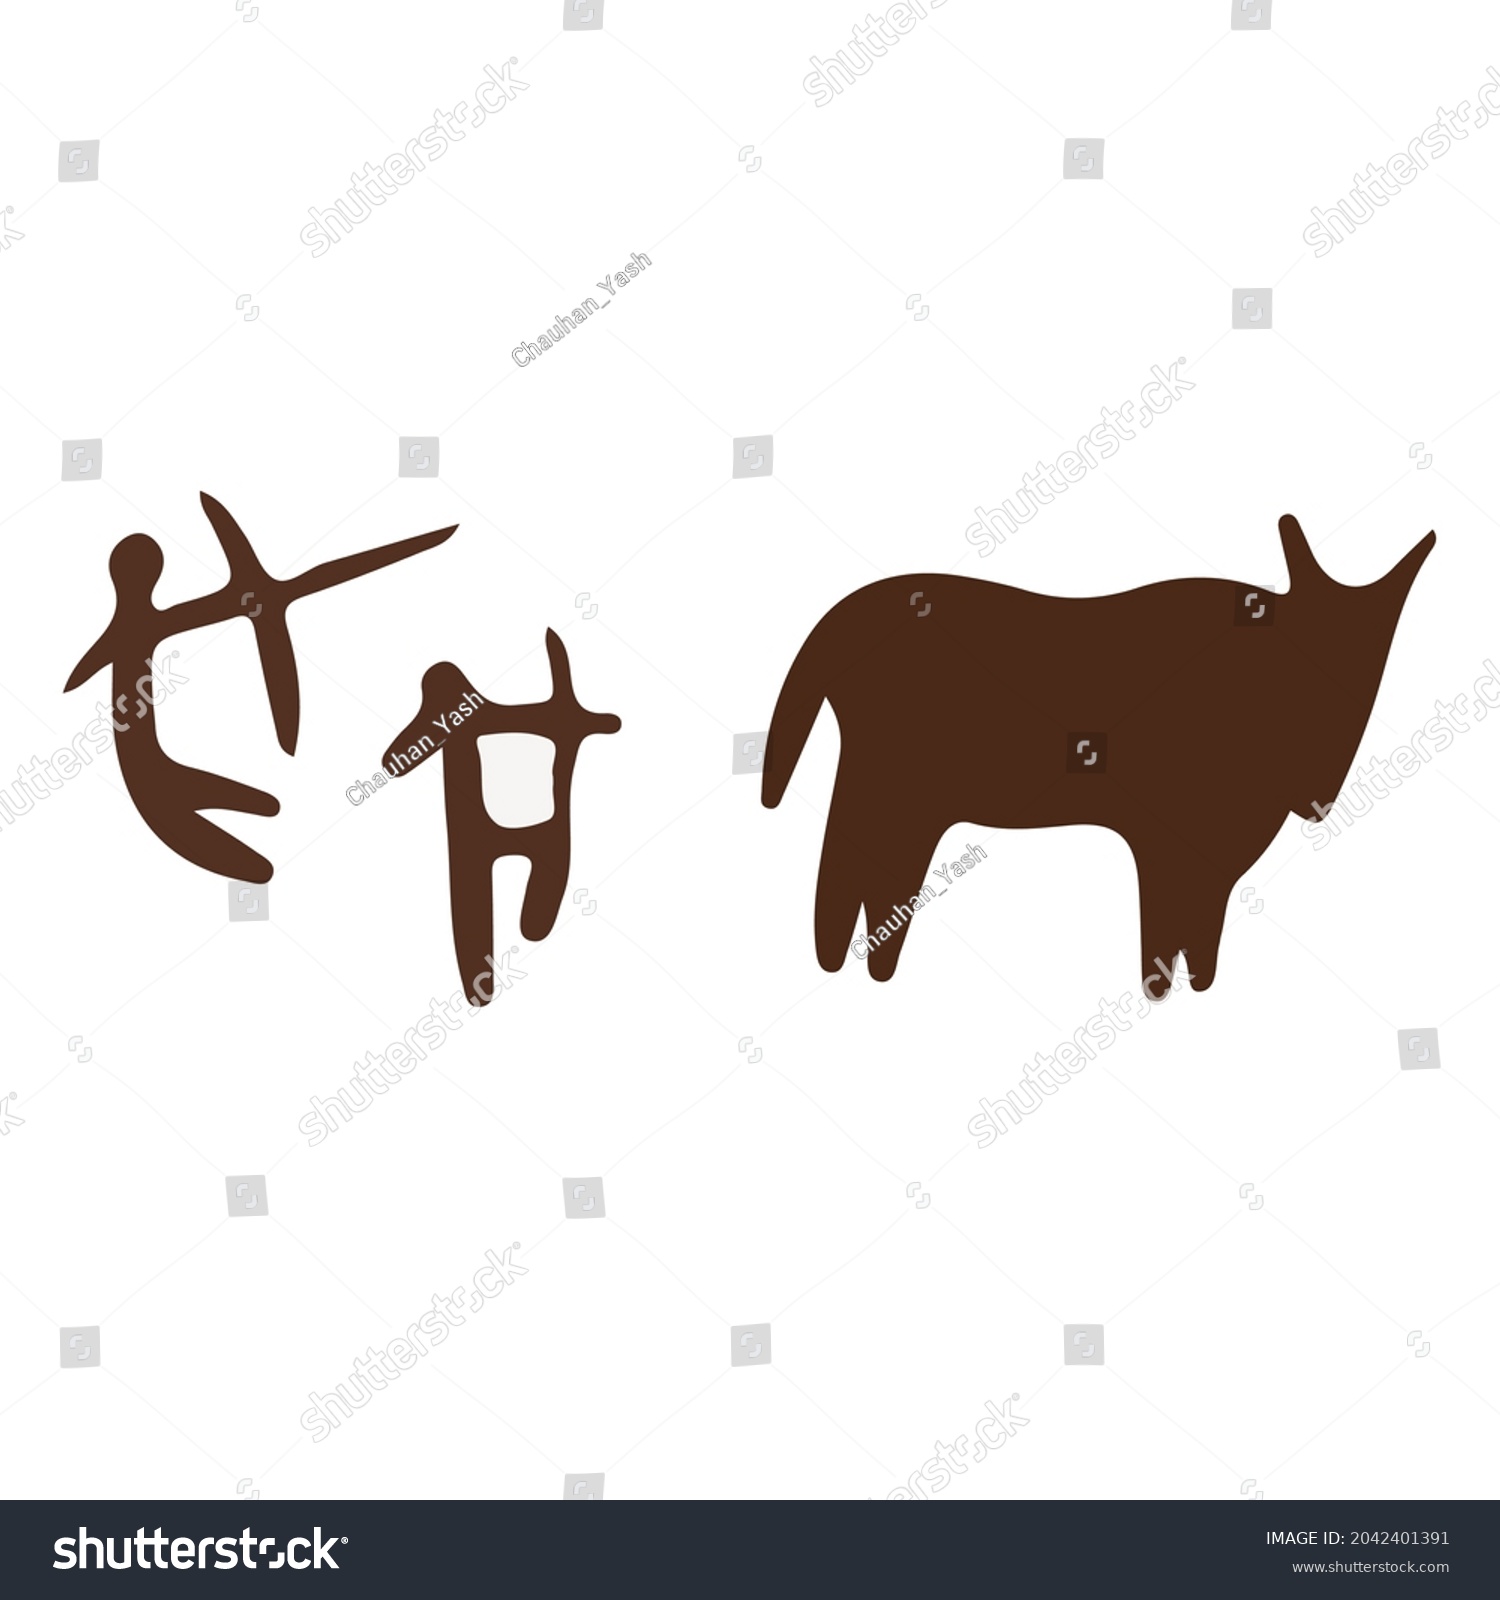 SVG of cro magnon cave drawings hand drawn svg